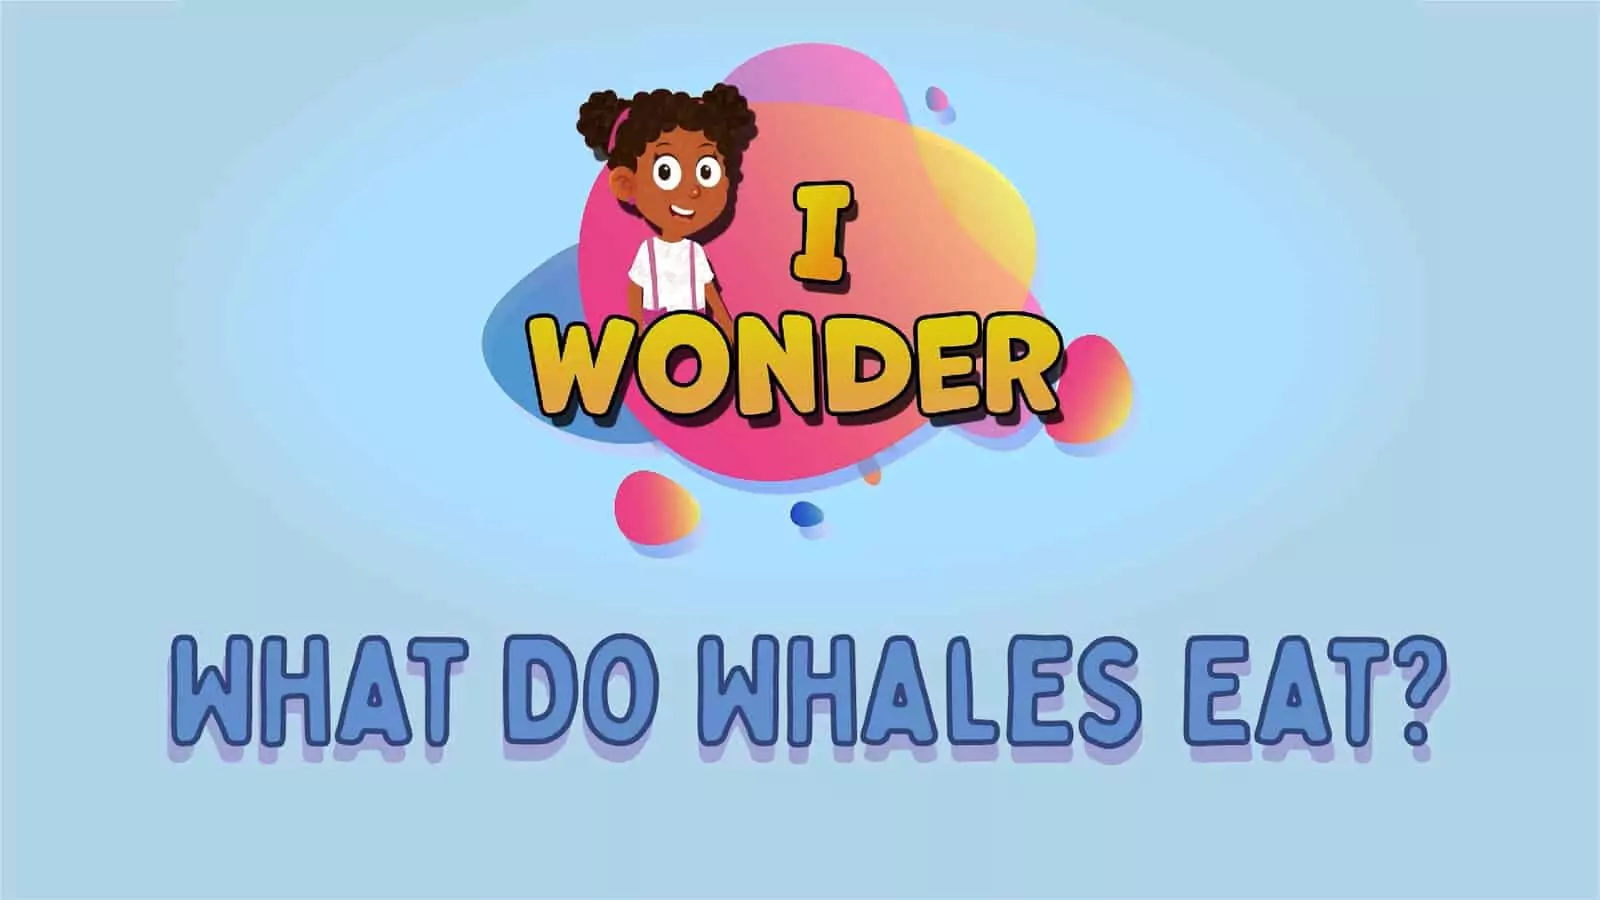 What Do Whales Eat?